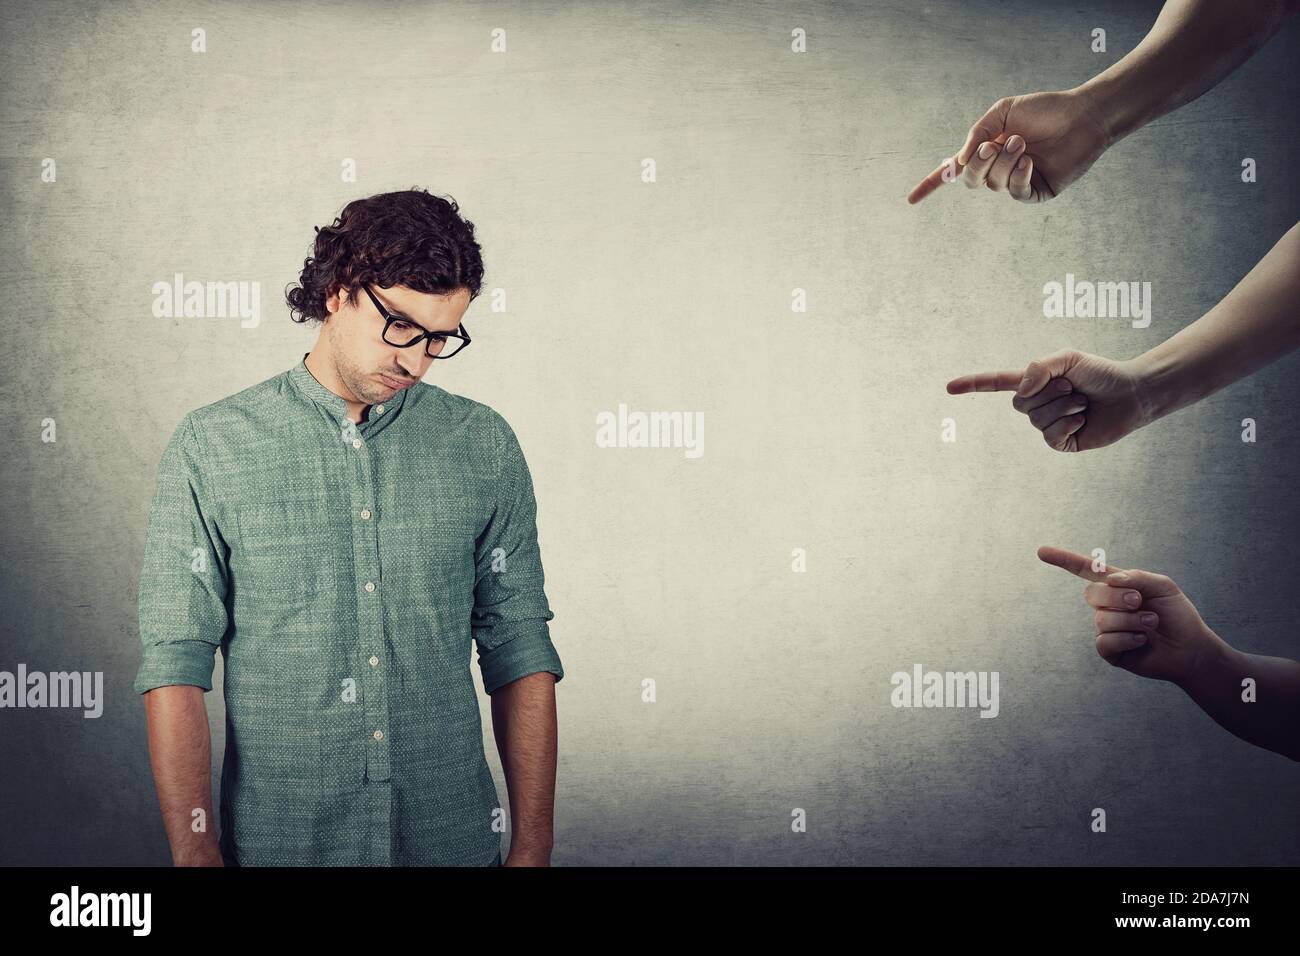 Stressed man, curly hair wears eyeglasses, looks down exhausted and depressed, feels ashamed being under pressure, as multiple hands pointing forefing Stock Photo